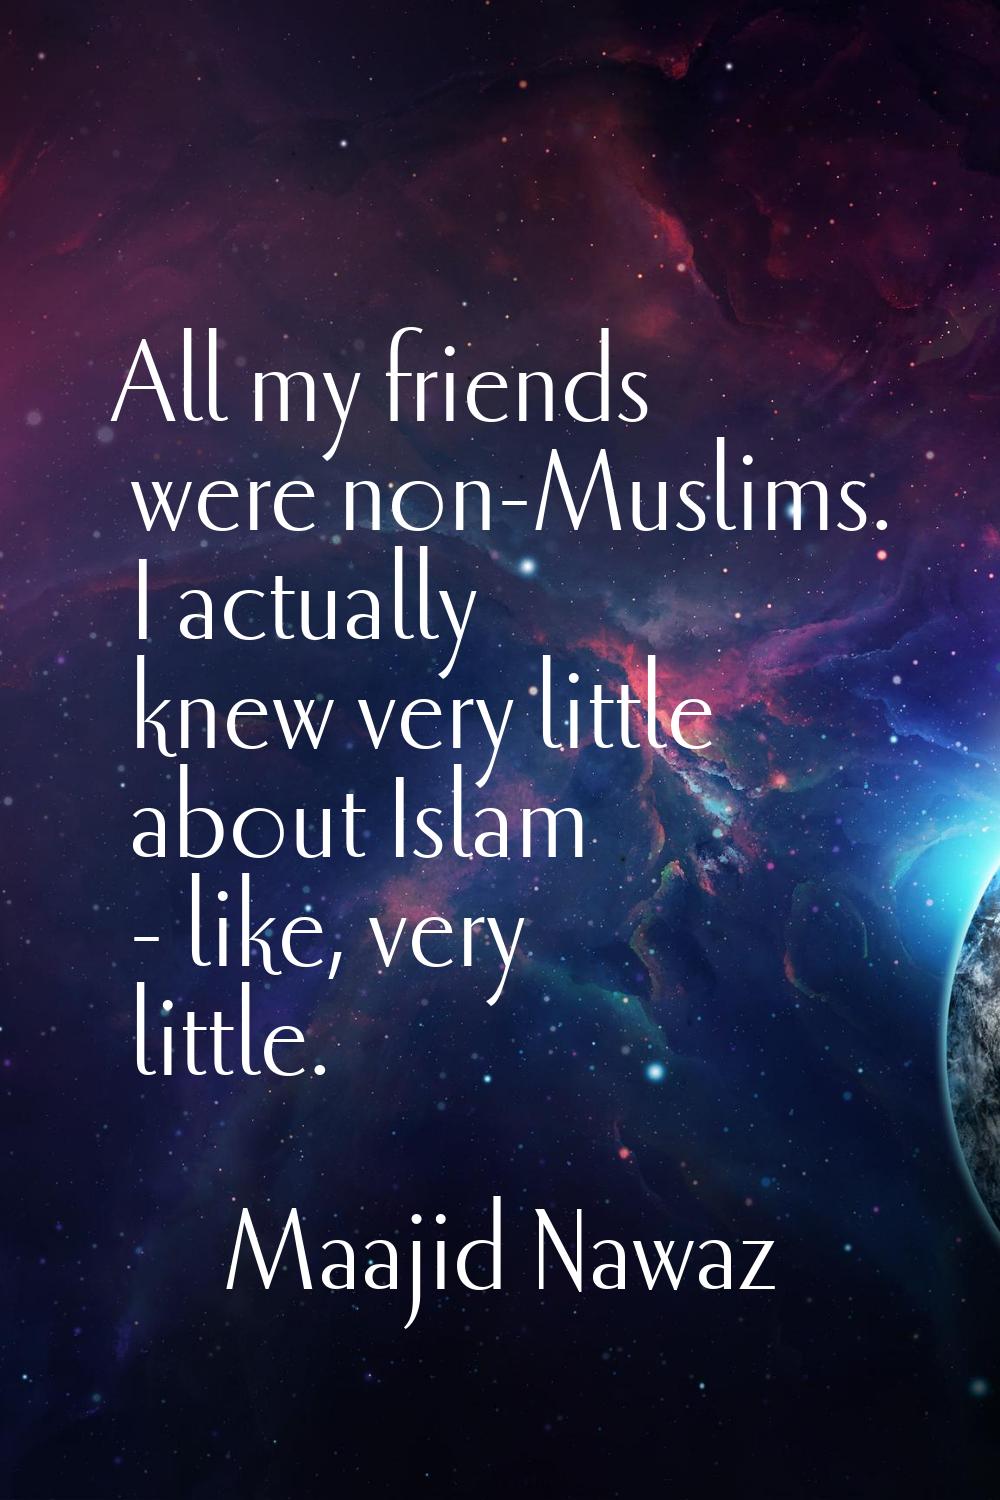 All my friends were non-Muslims. I actually knew very little about Islam - like, very little.